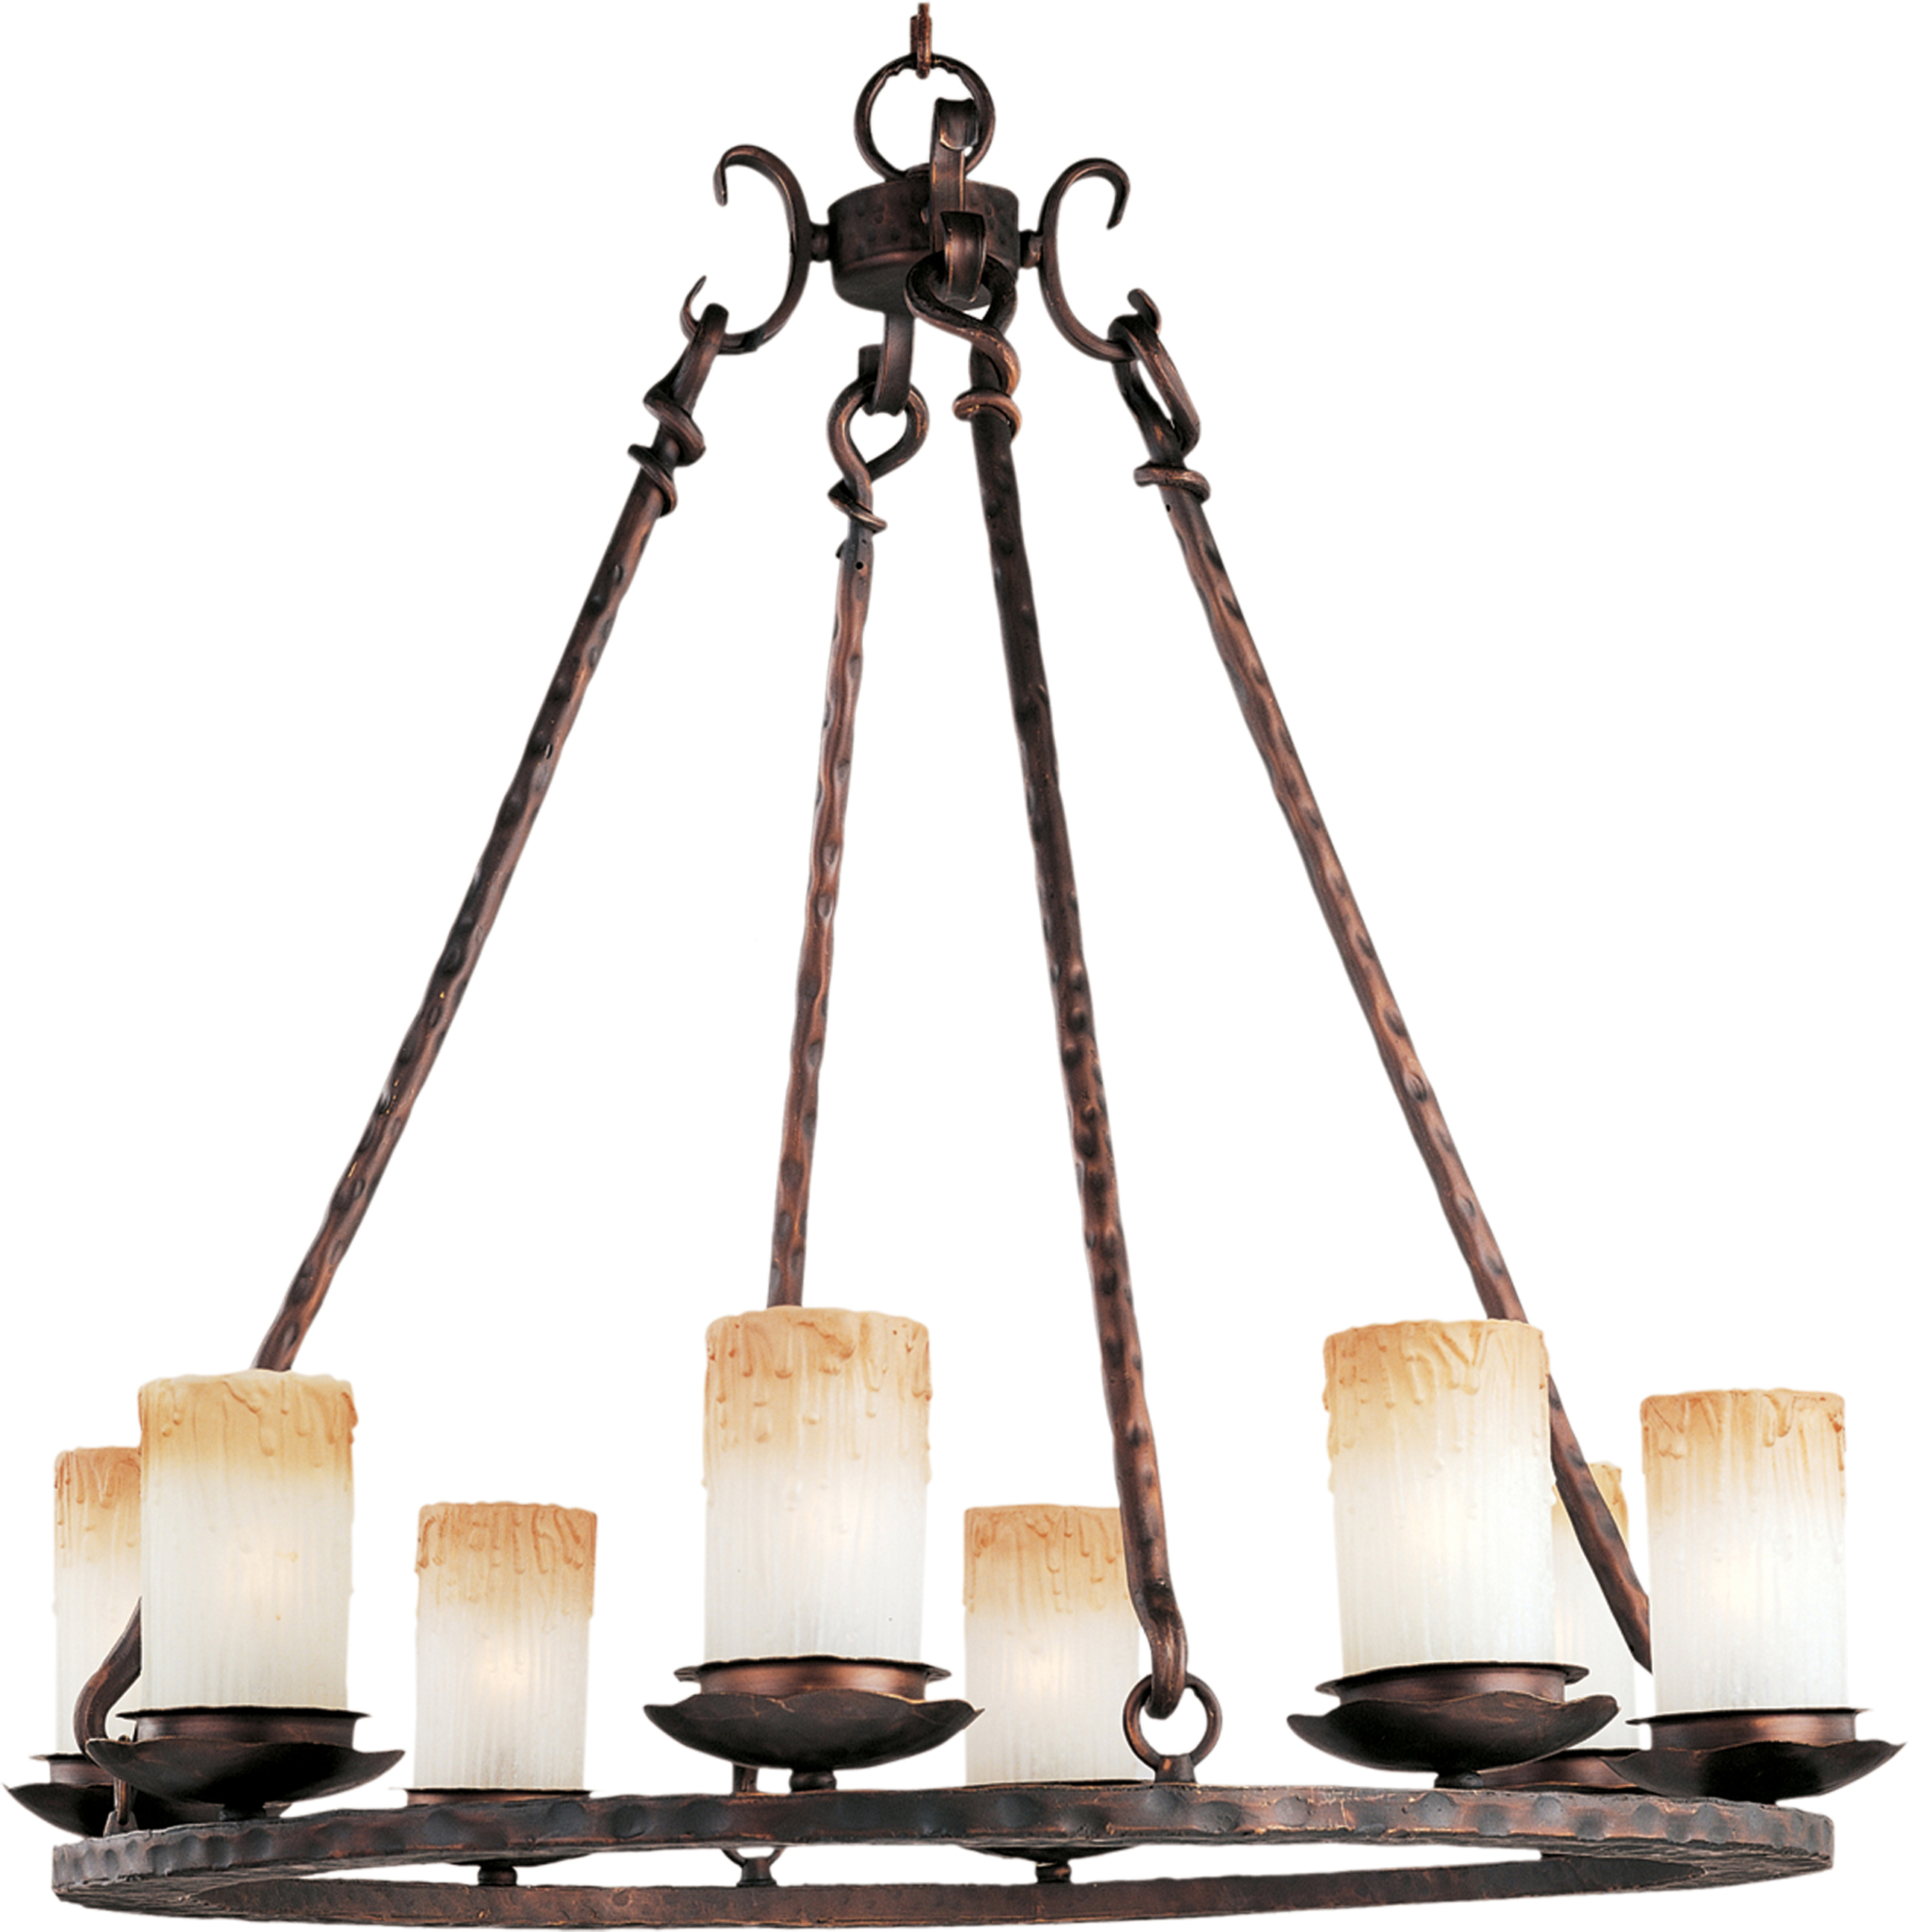 Country faux candle 8 light up lighting chandelier from the